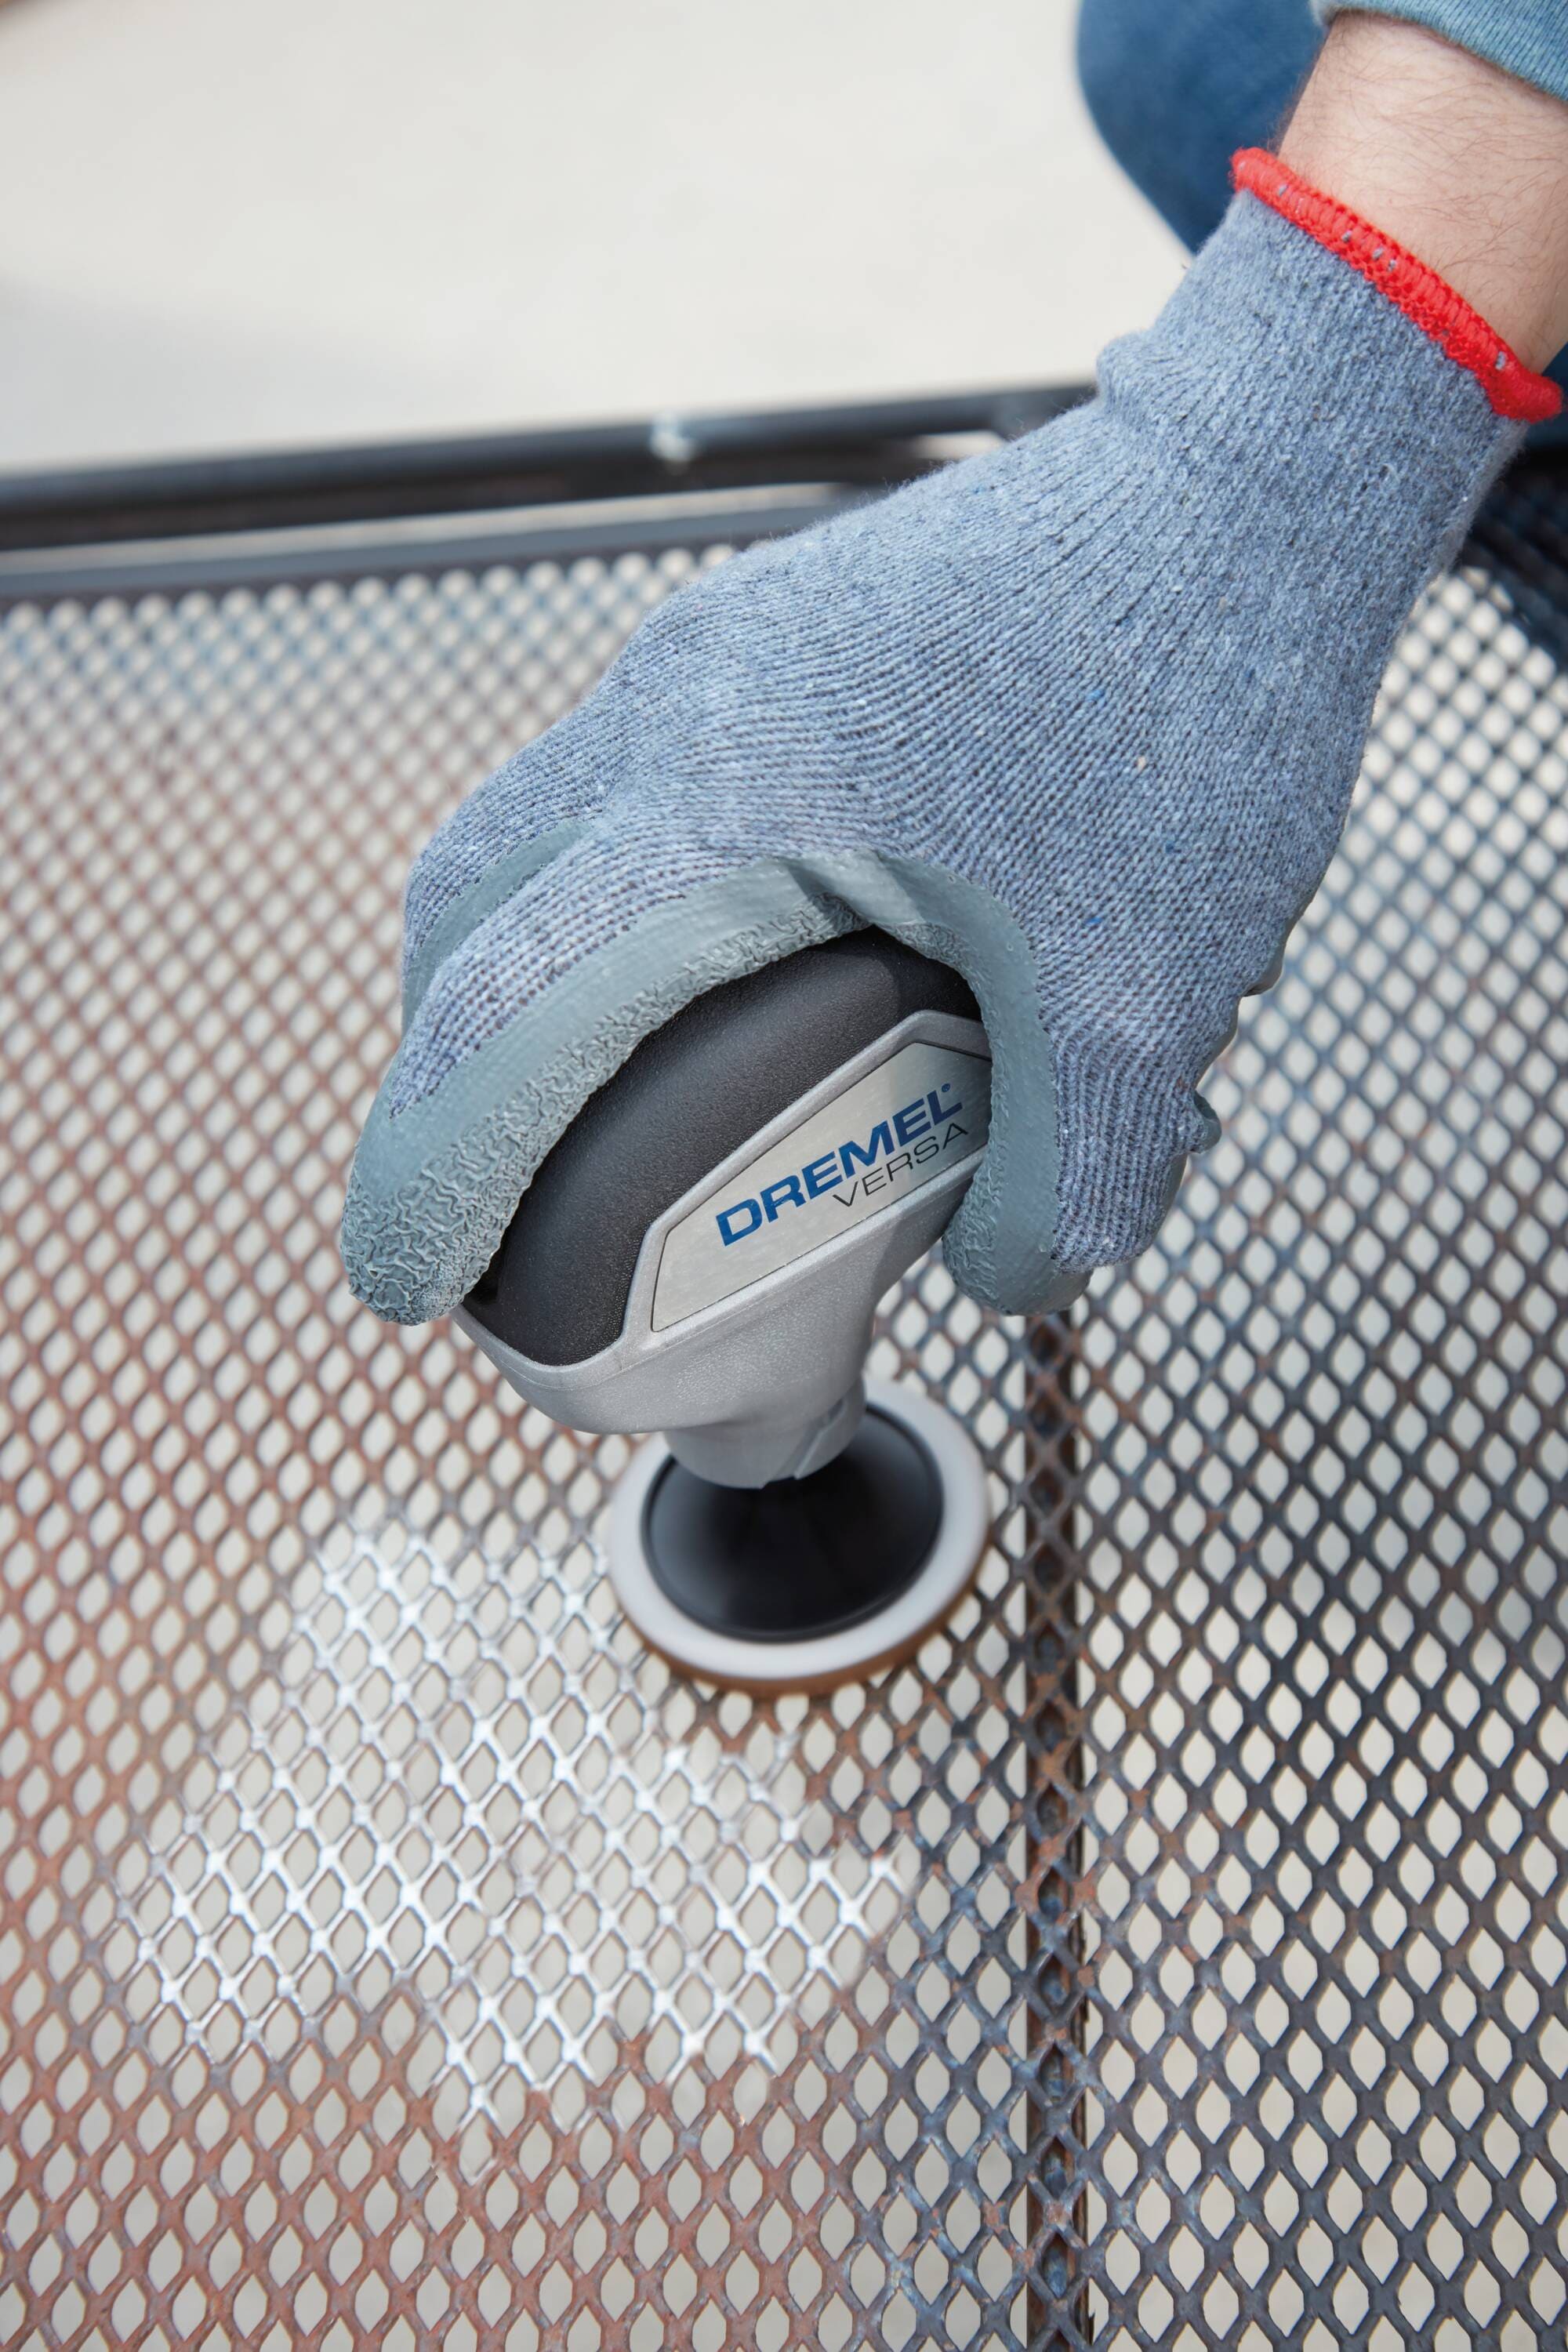 Dremel Versa Power department Scrubbers Power in the at Scrubber